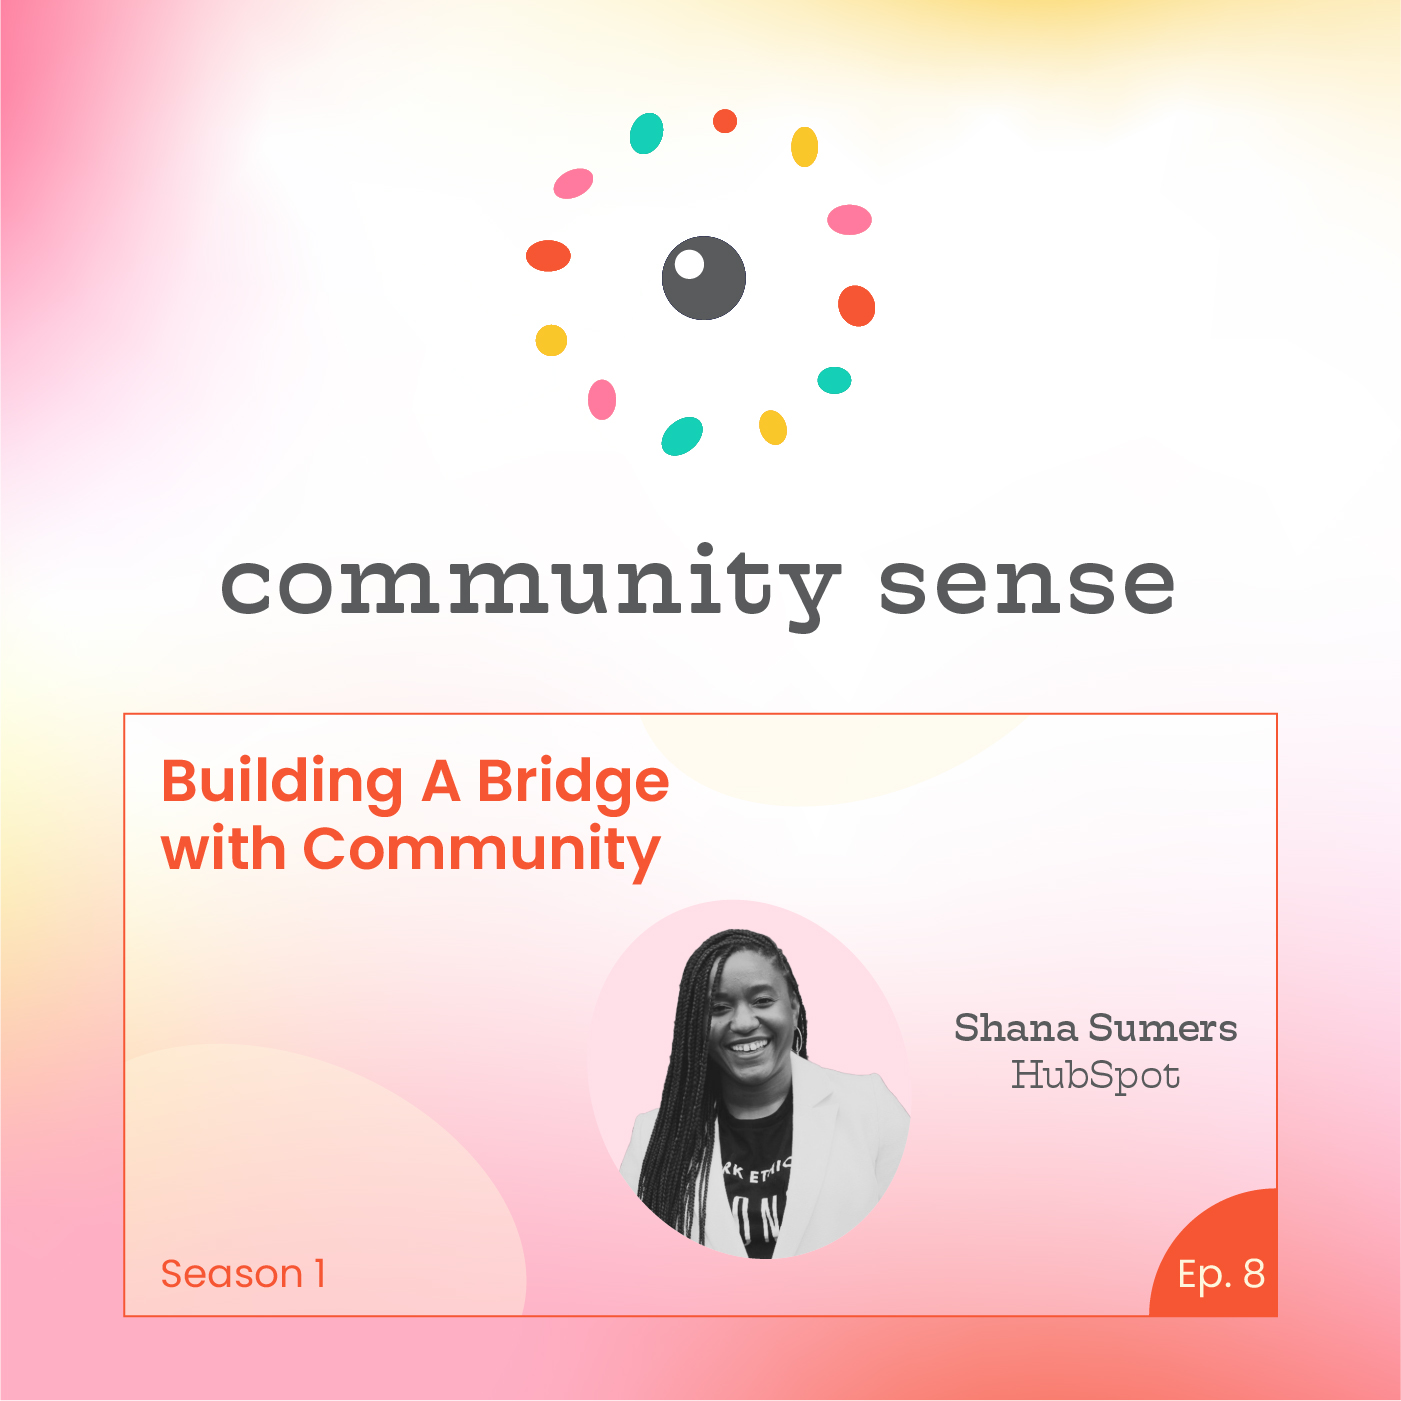 Building A Bridge With Community with Shana Summers at HubSpot